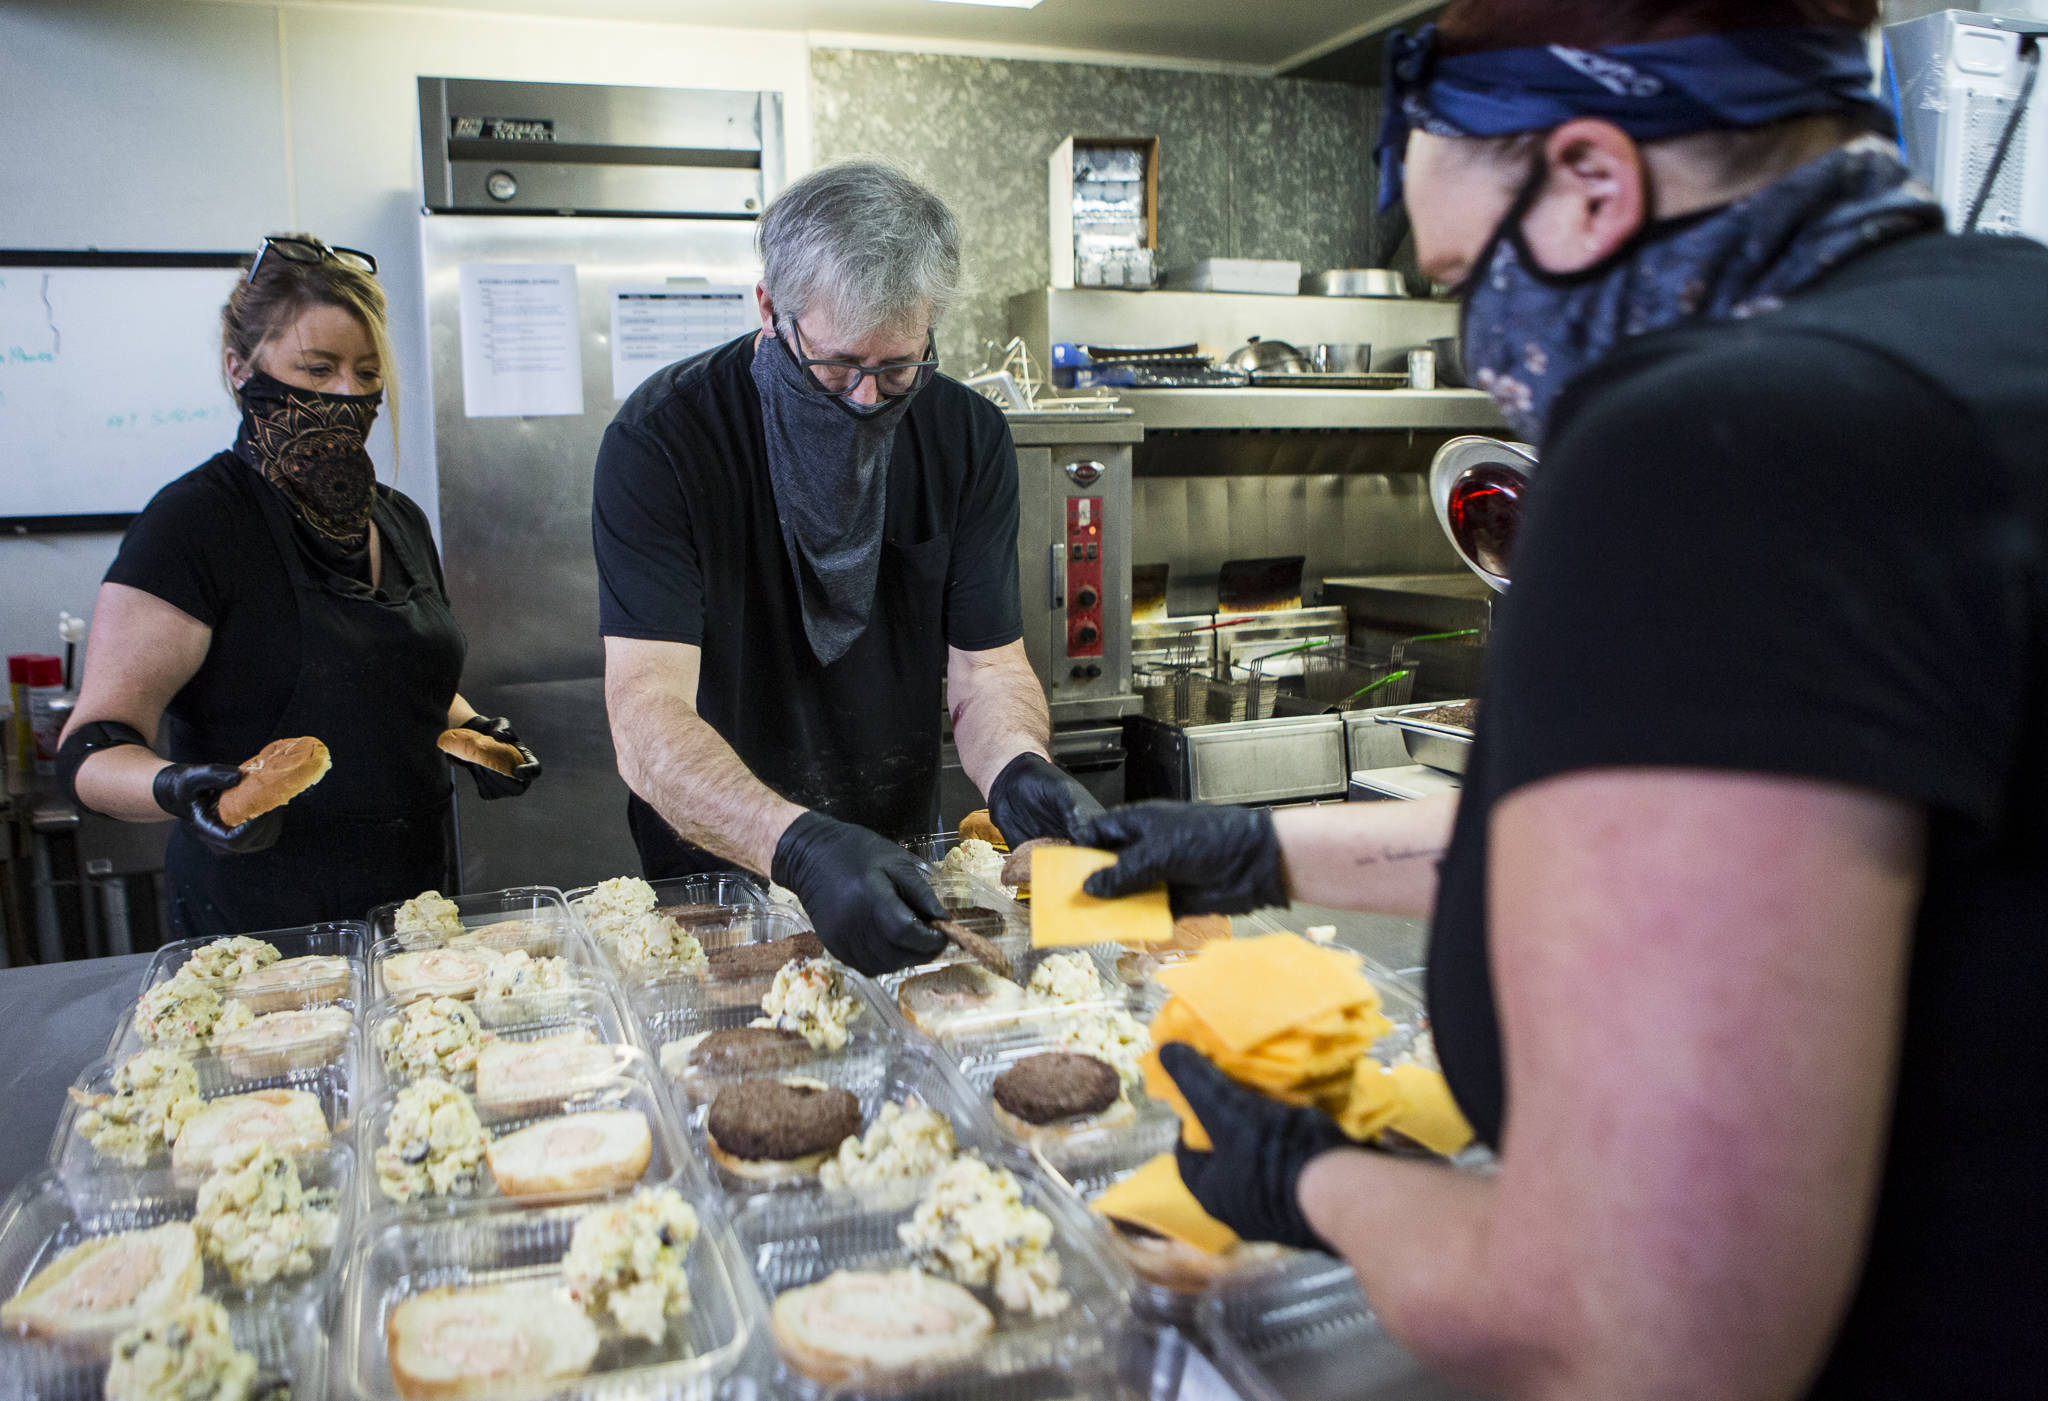 Jennifer Carlson, left to right, Jim Staniford and Katherine Stipech put together cheeseburger and potato salad meals Thursday for the Everett Gospel Mission in Everett. (Olivia Vanni / The Herald)